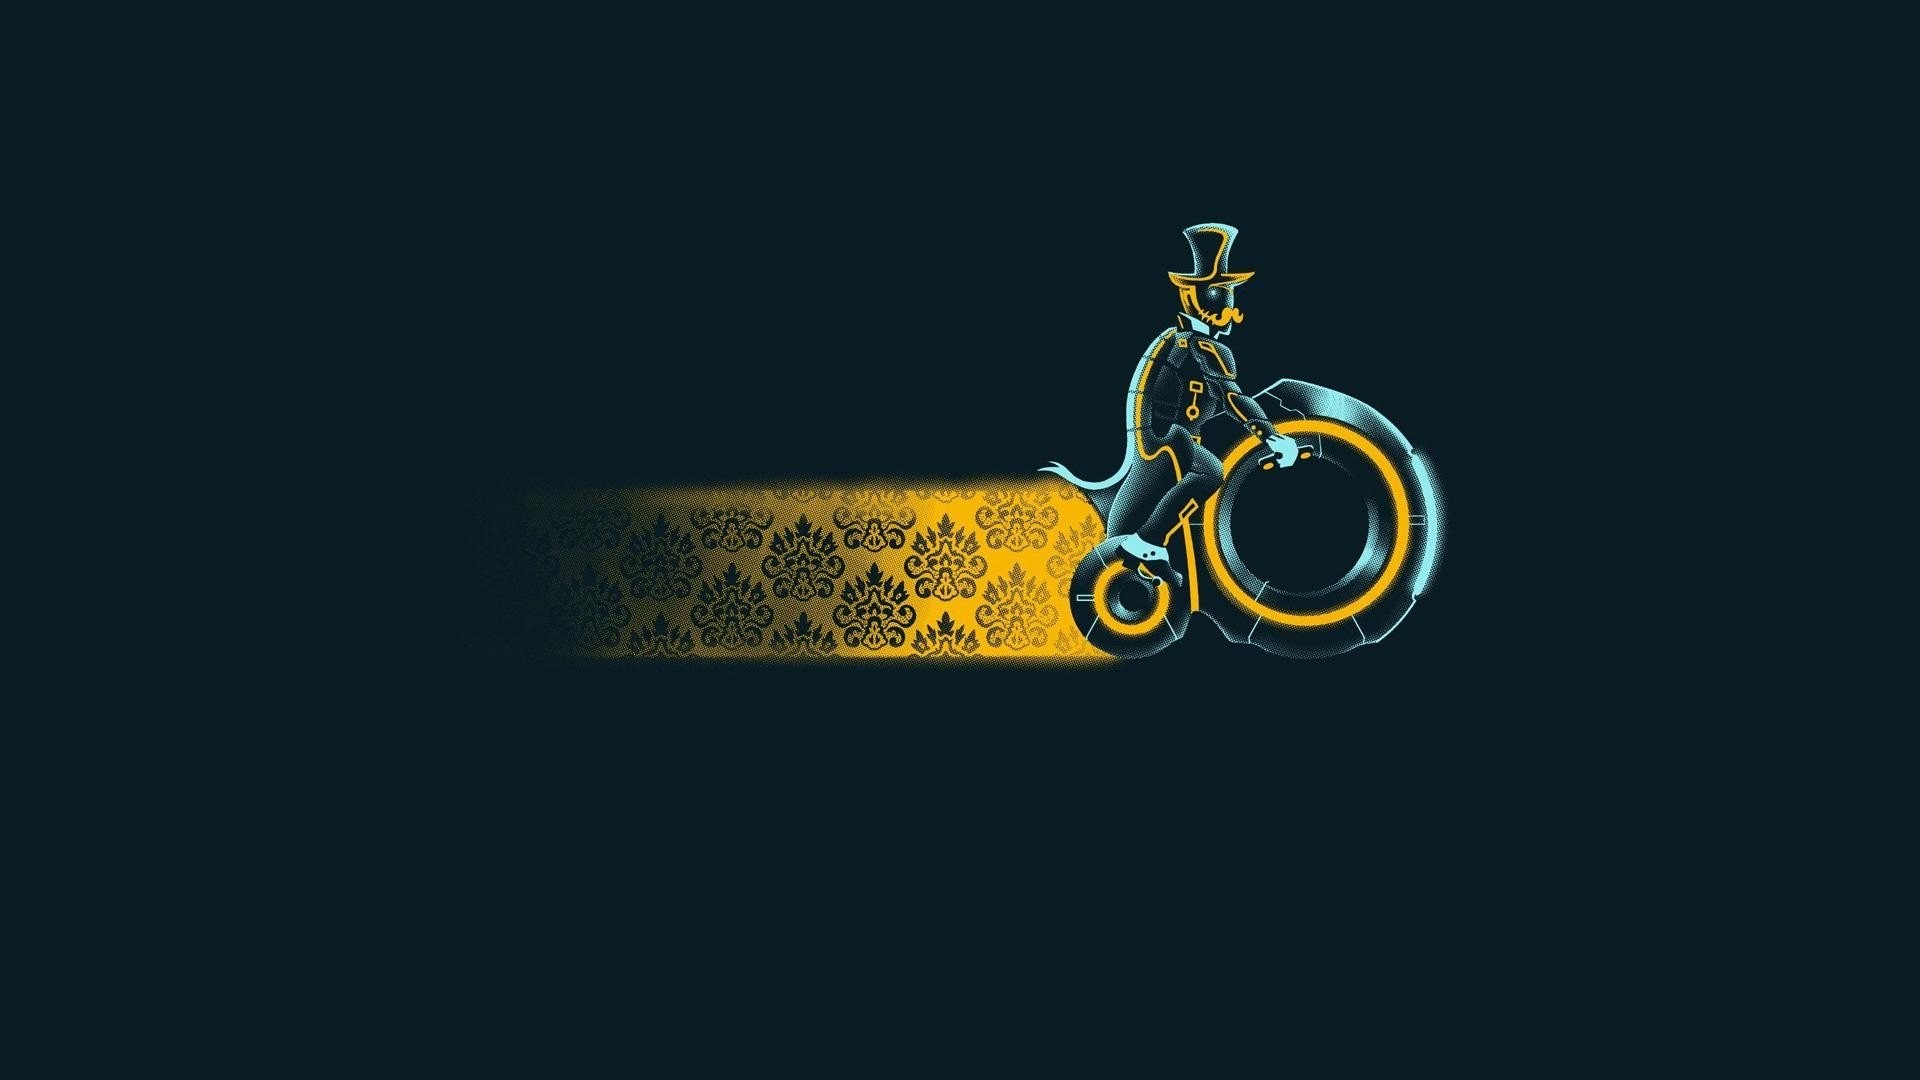 1920x1080 tron, humor wallpapers,free images, comics, vintage view,bike, tablet,  minimalistic, funny Wallpaper HD